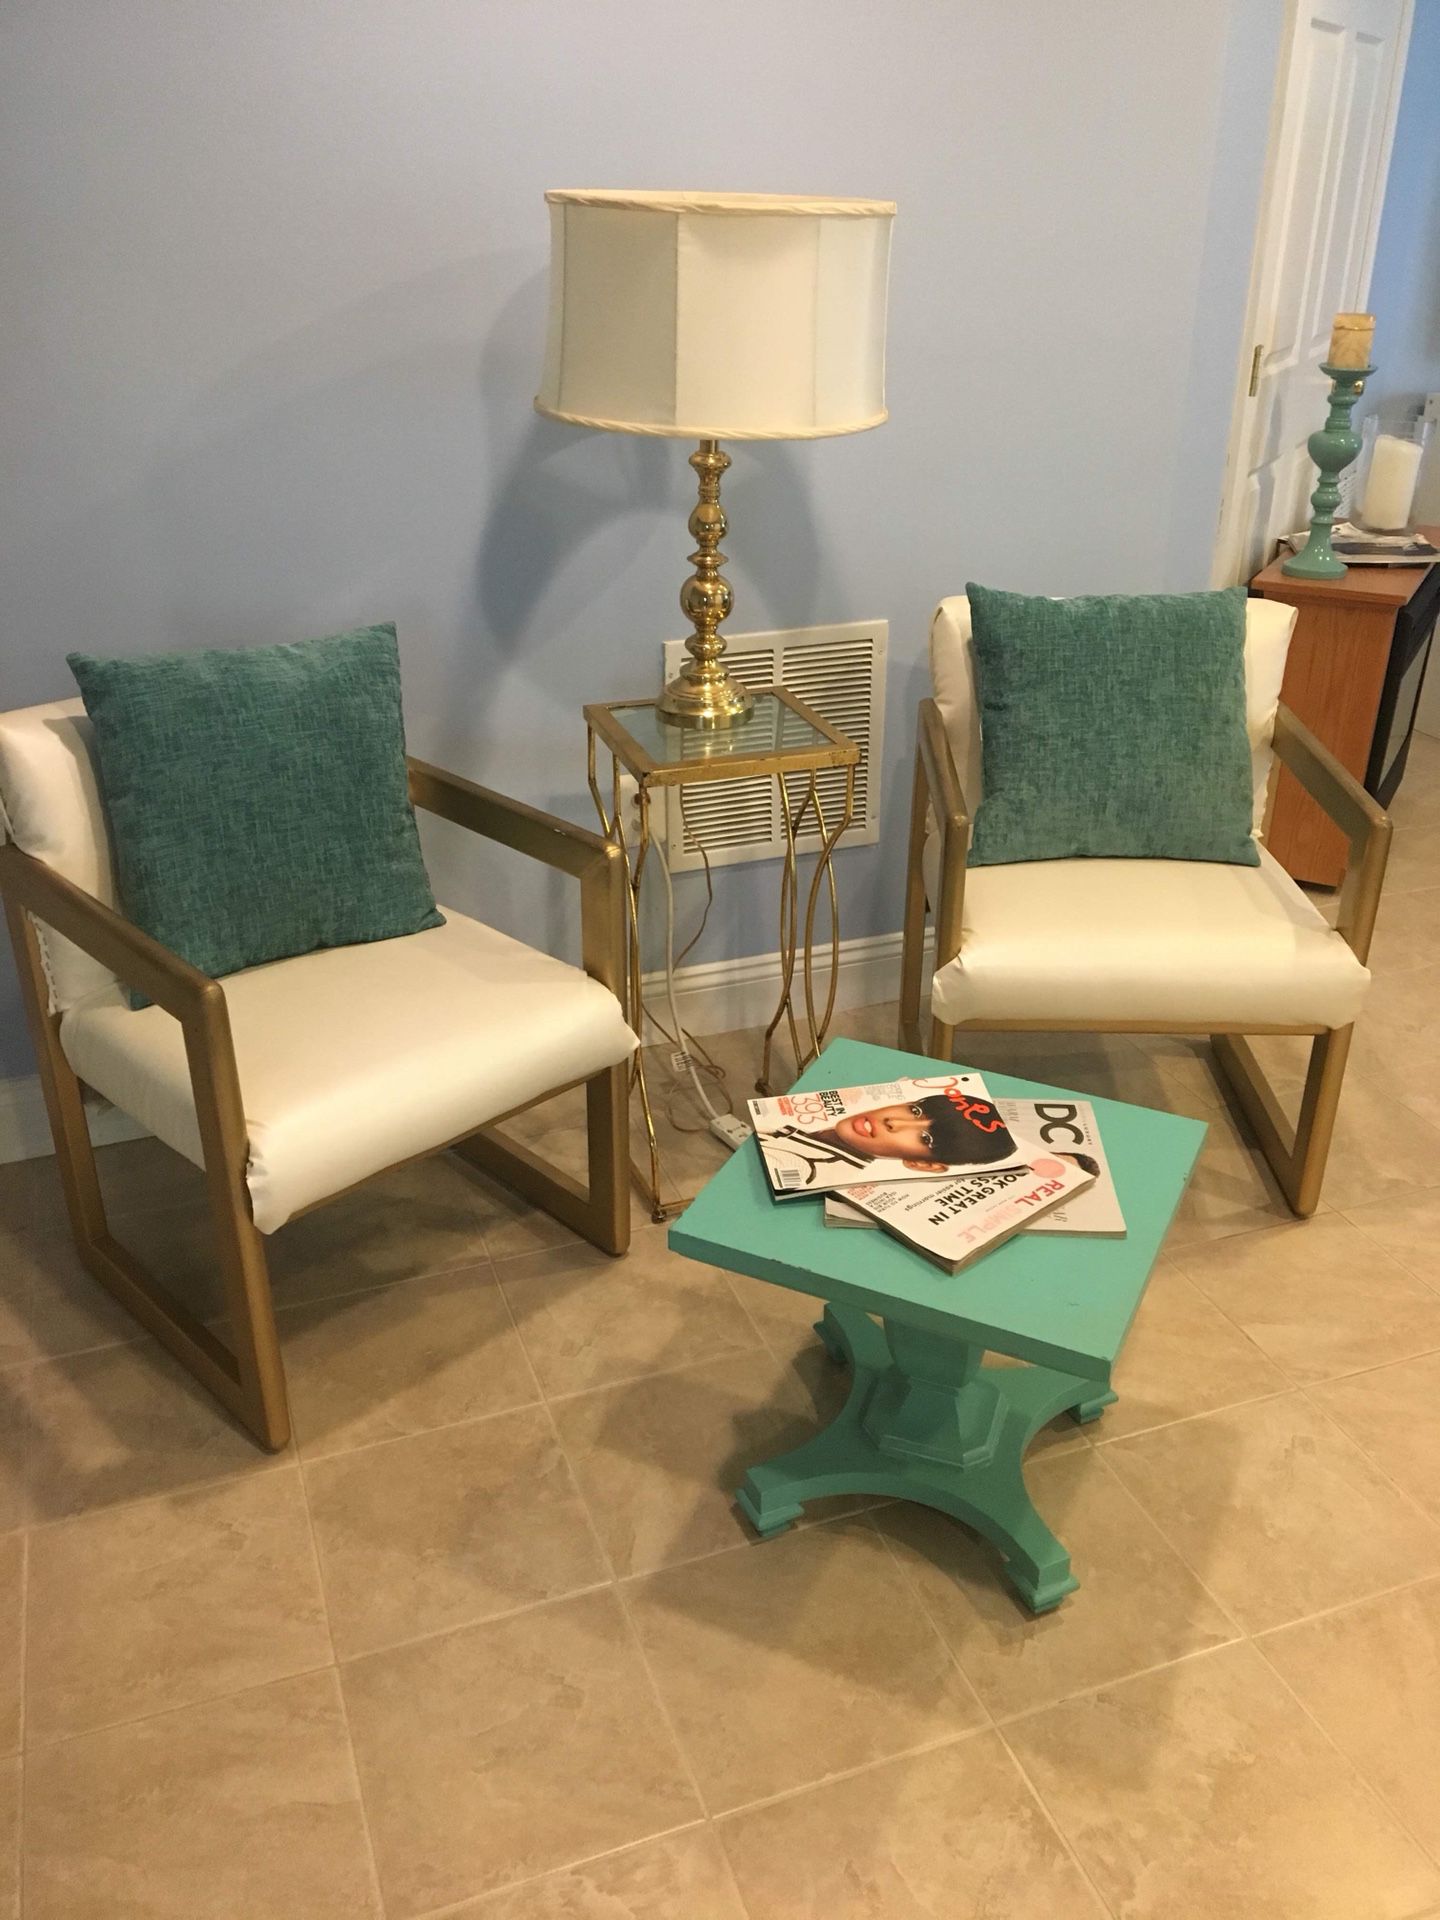 Side chairs, coffee table - DIY project